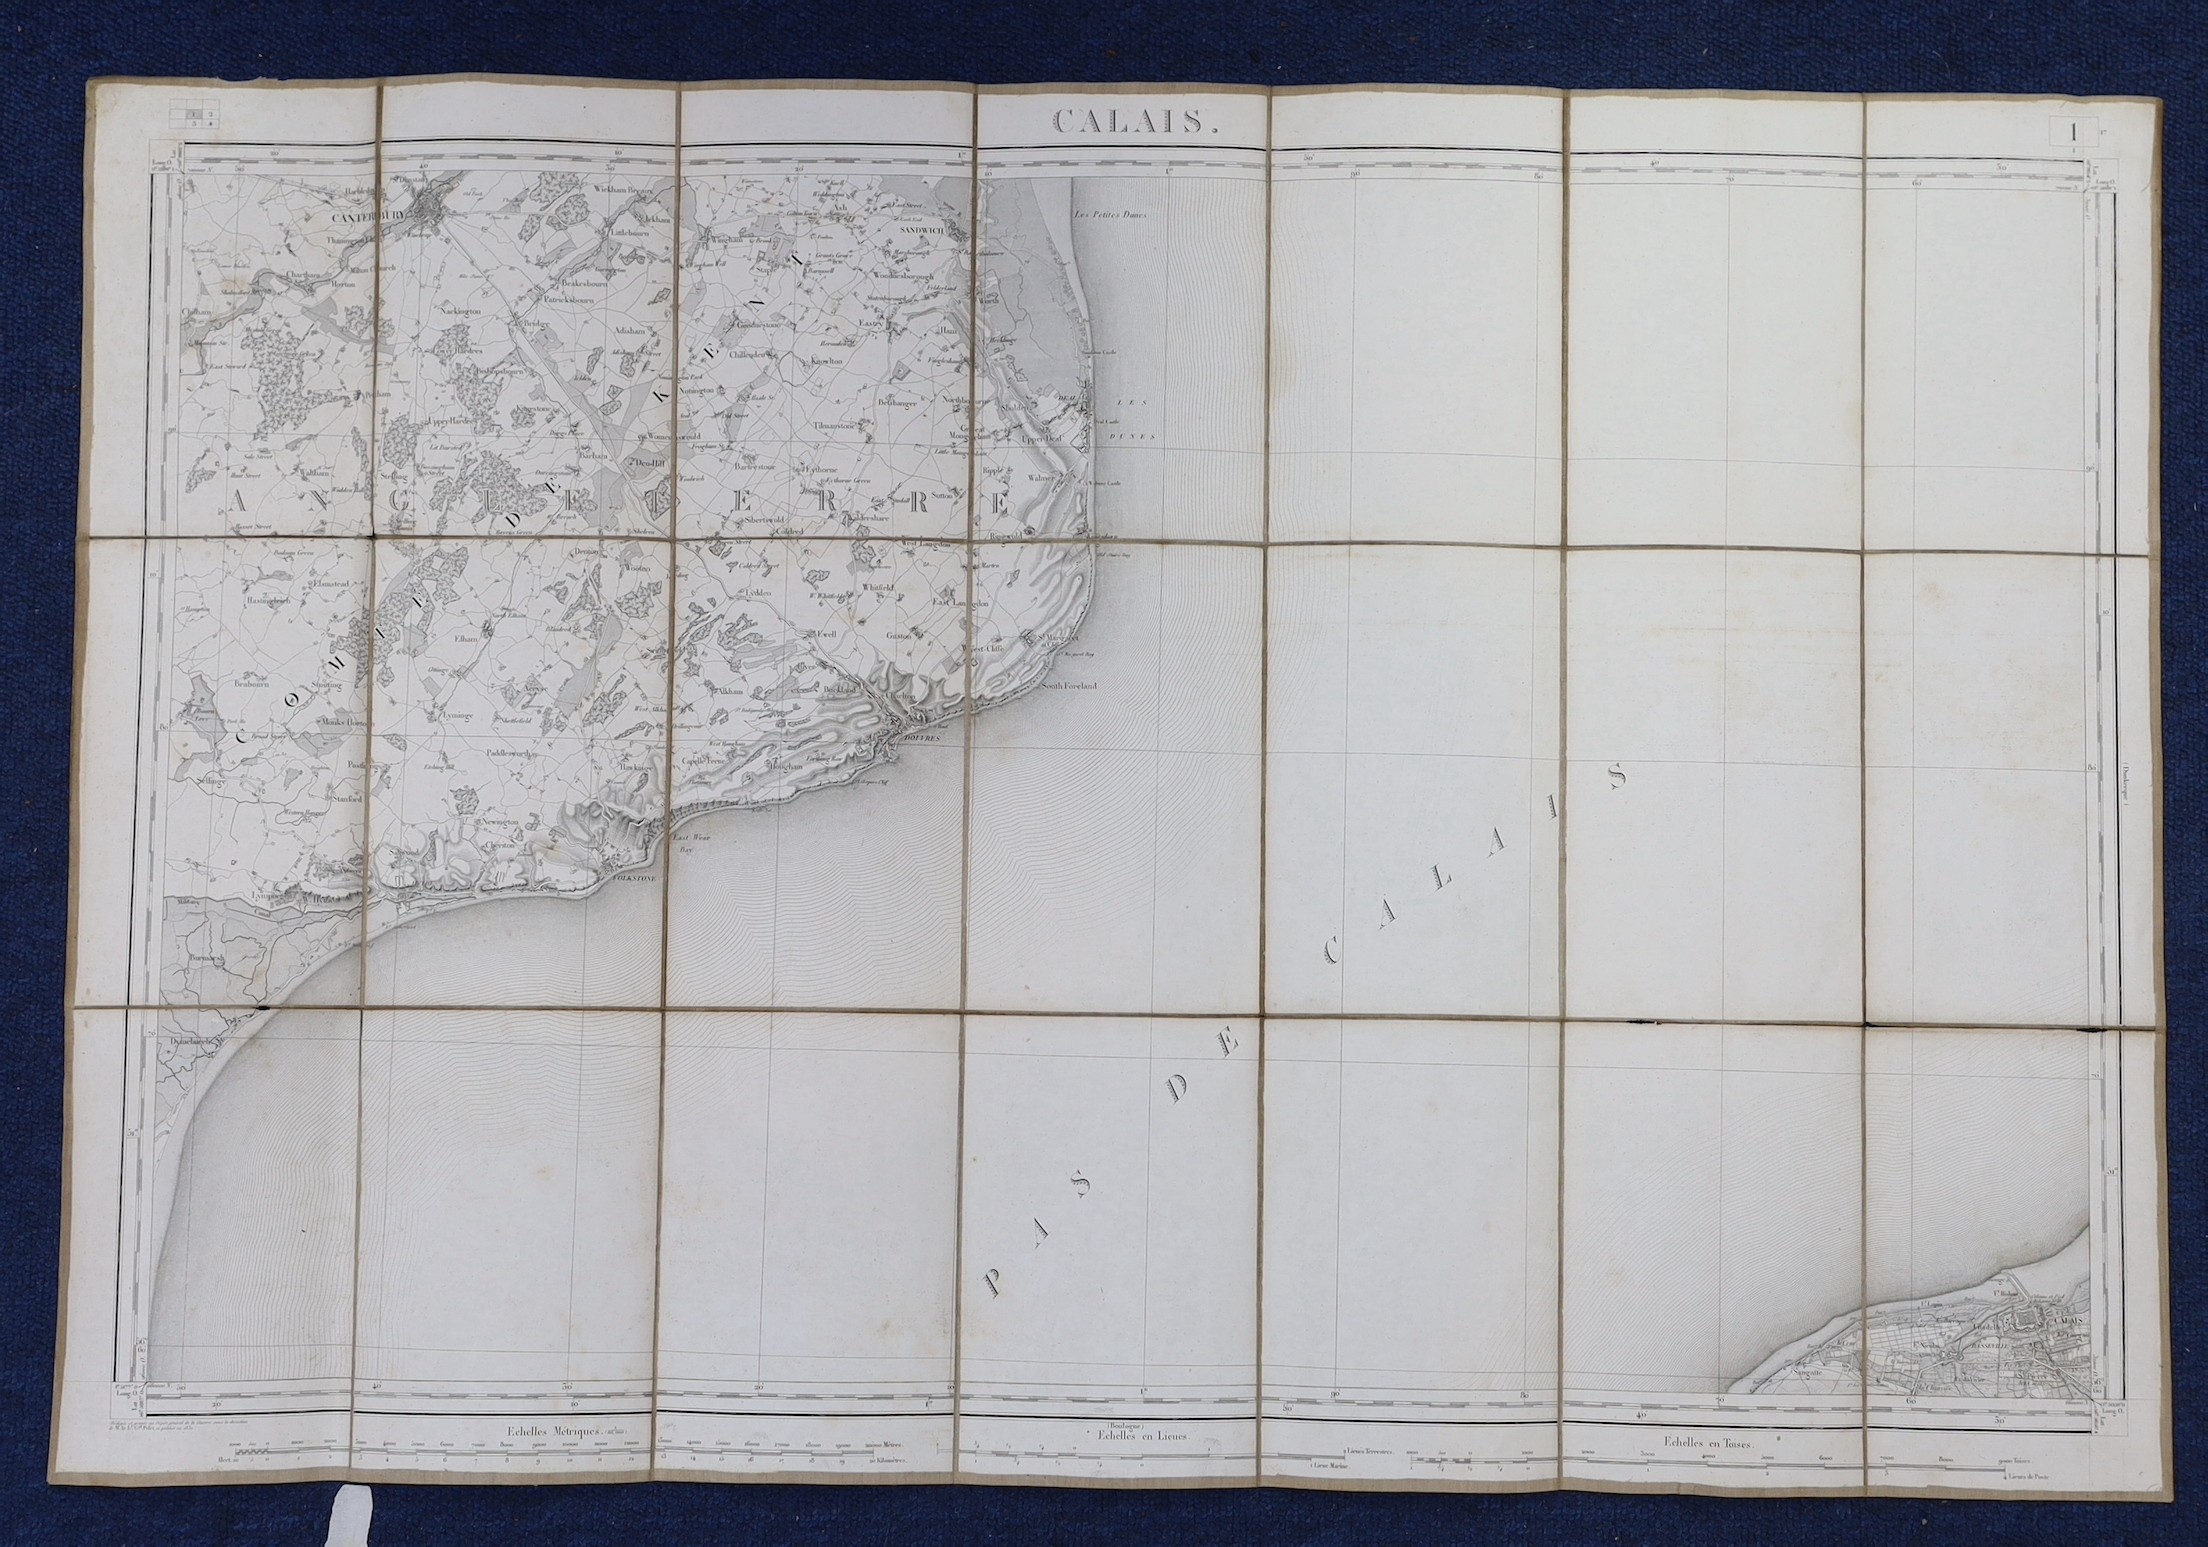 Picquet, Charles - France, an incomplete set of 53 engraved linen backed folding maps, including those numbered 1-8, 10-15, 22, 30, 32, 36-38, 43-45, 54-55, 64-65, 66, 68, 70, 80, 82-85, 95, 97-100, 114-115, 140 and 151,